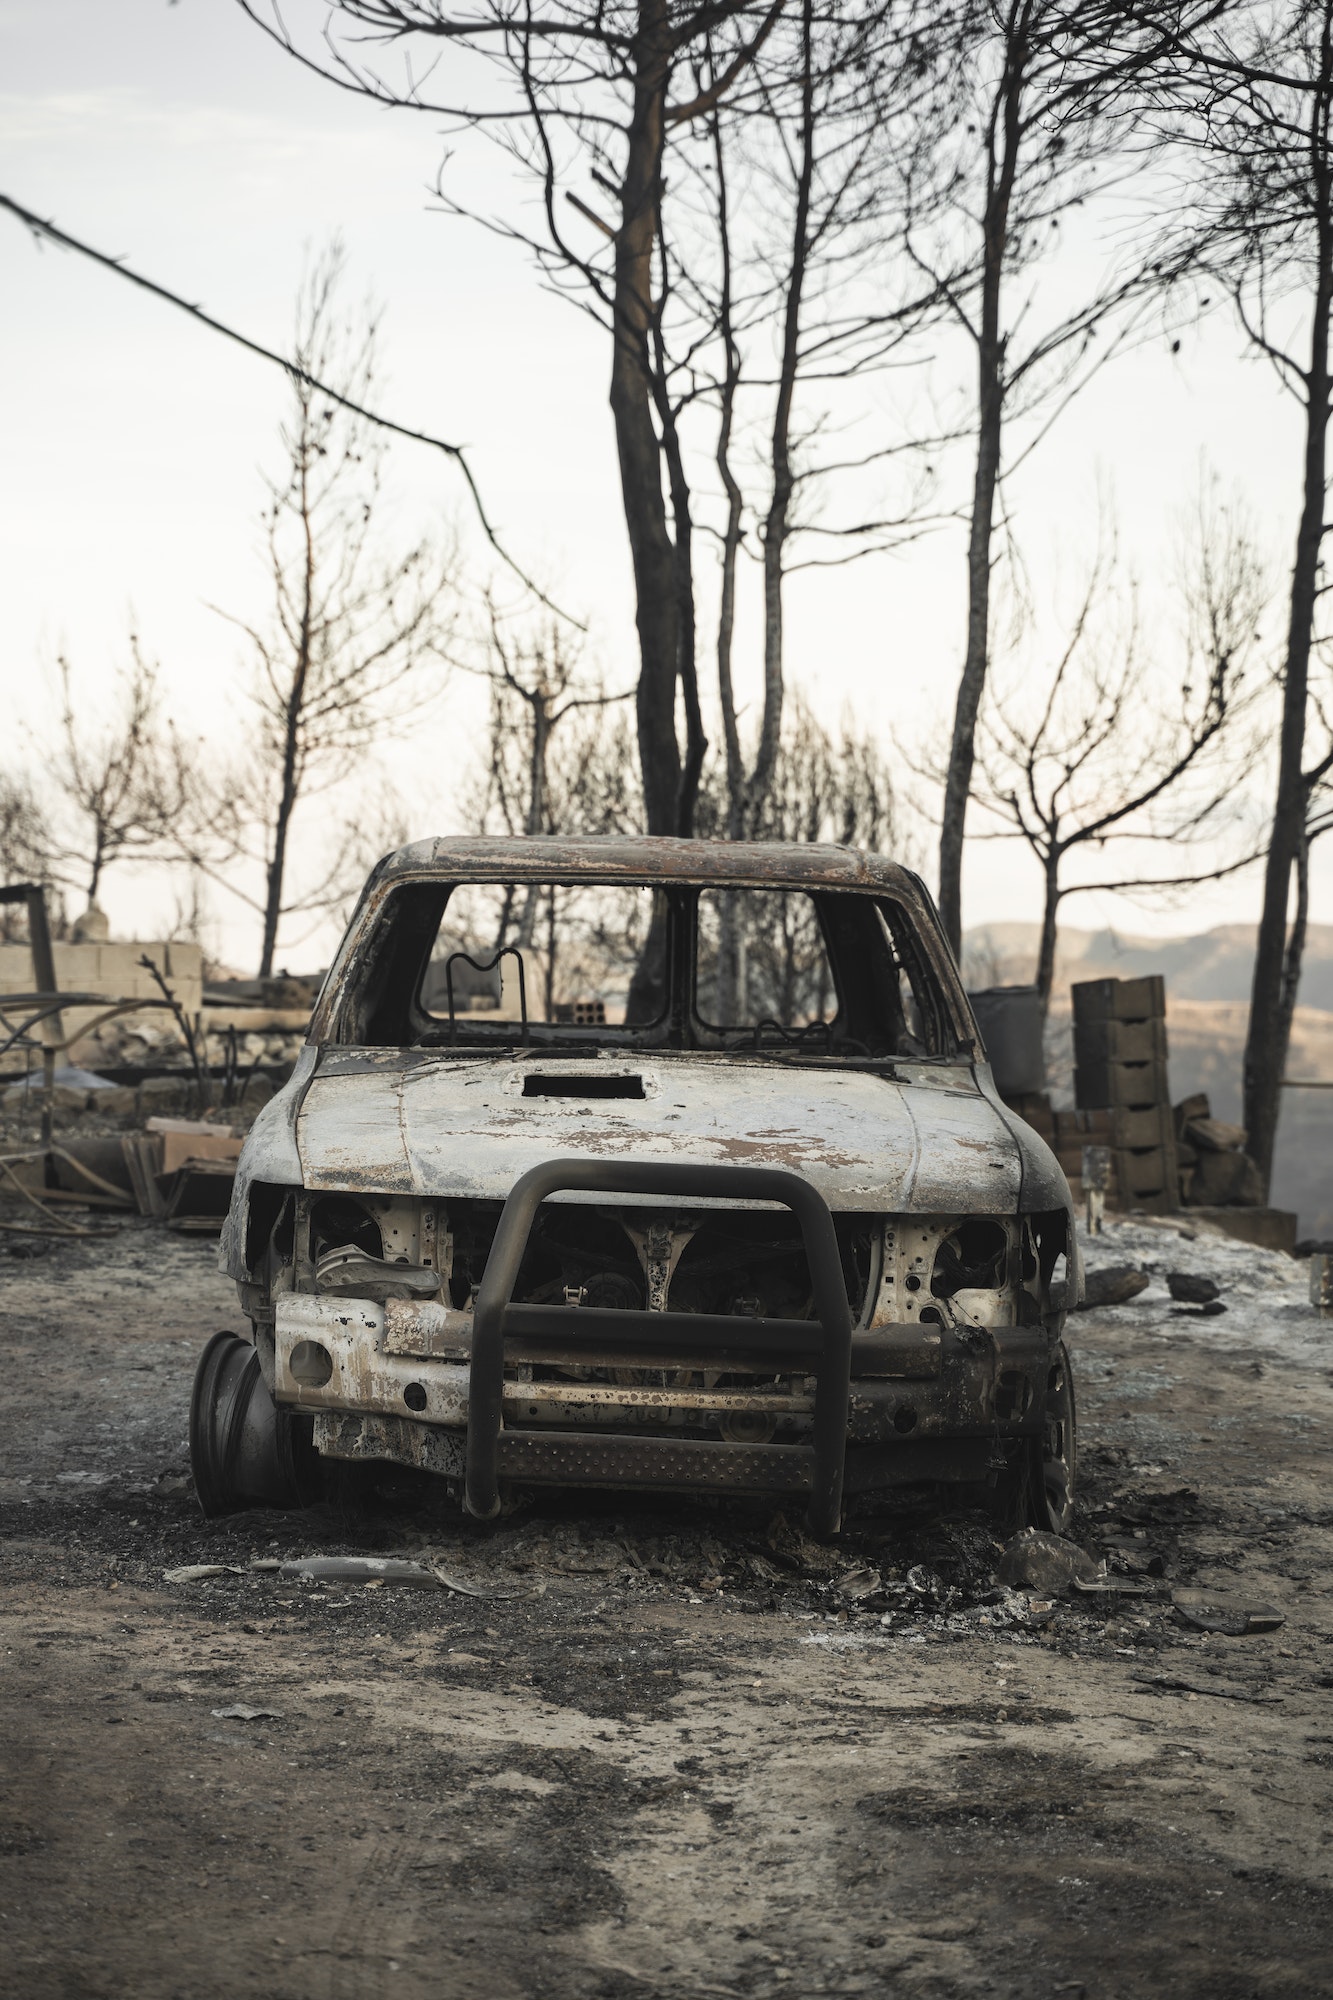 Burnt car aftermath forest fire consequence of climate change - Wildfire Crisis and Global Collapse